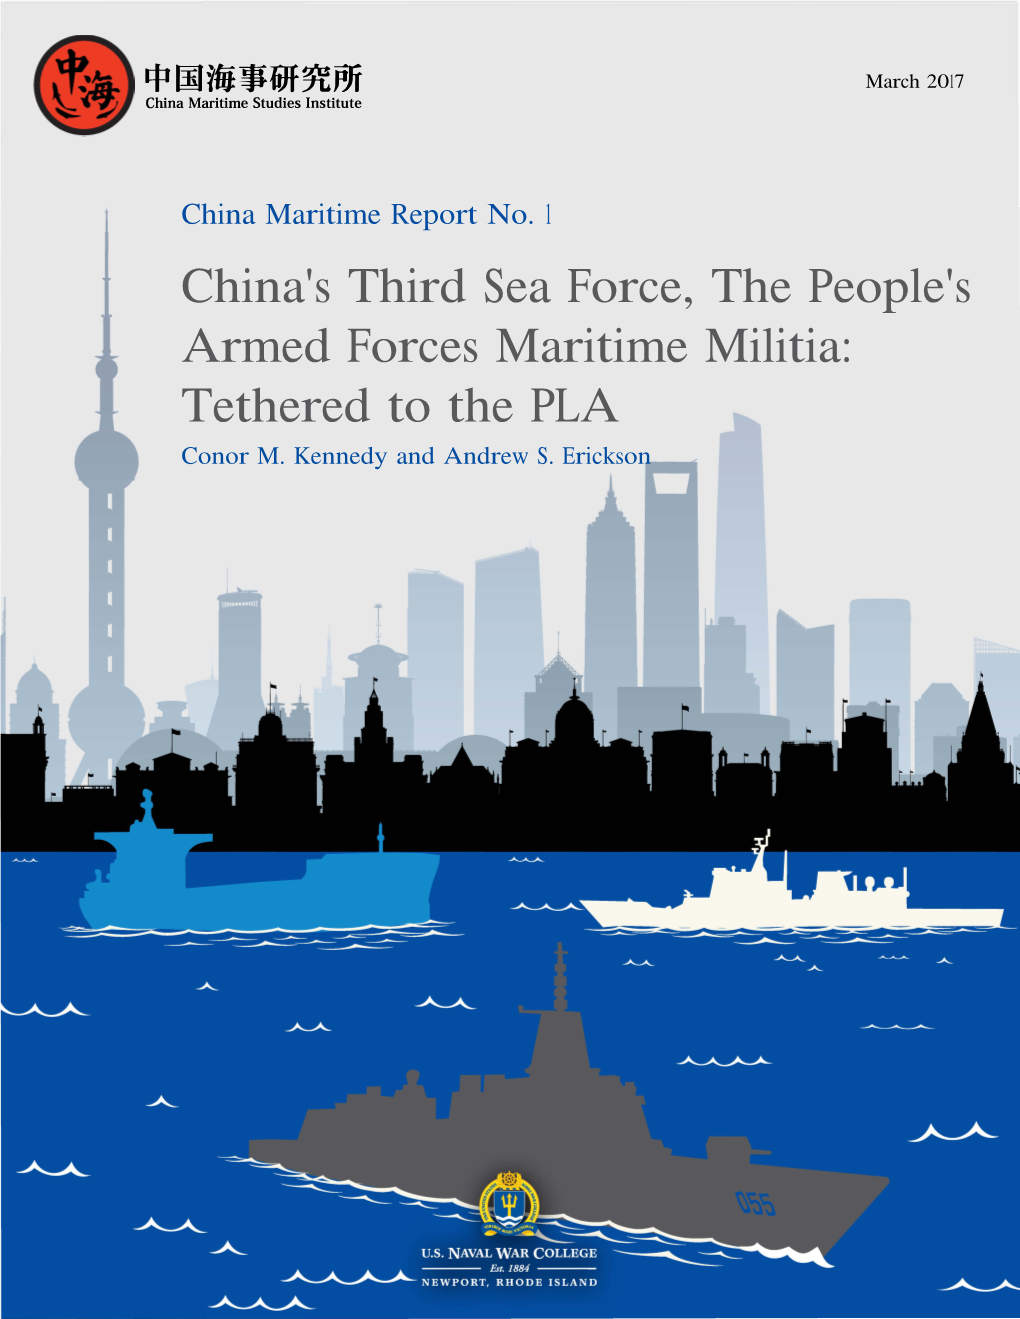 China's Third Sea Force, the People's Armed Forces Maritime Militia